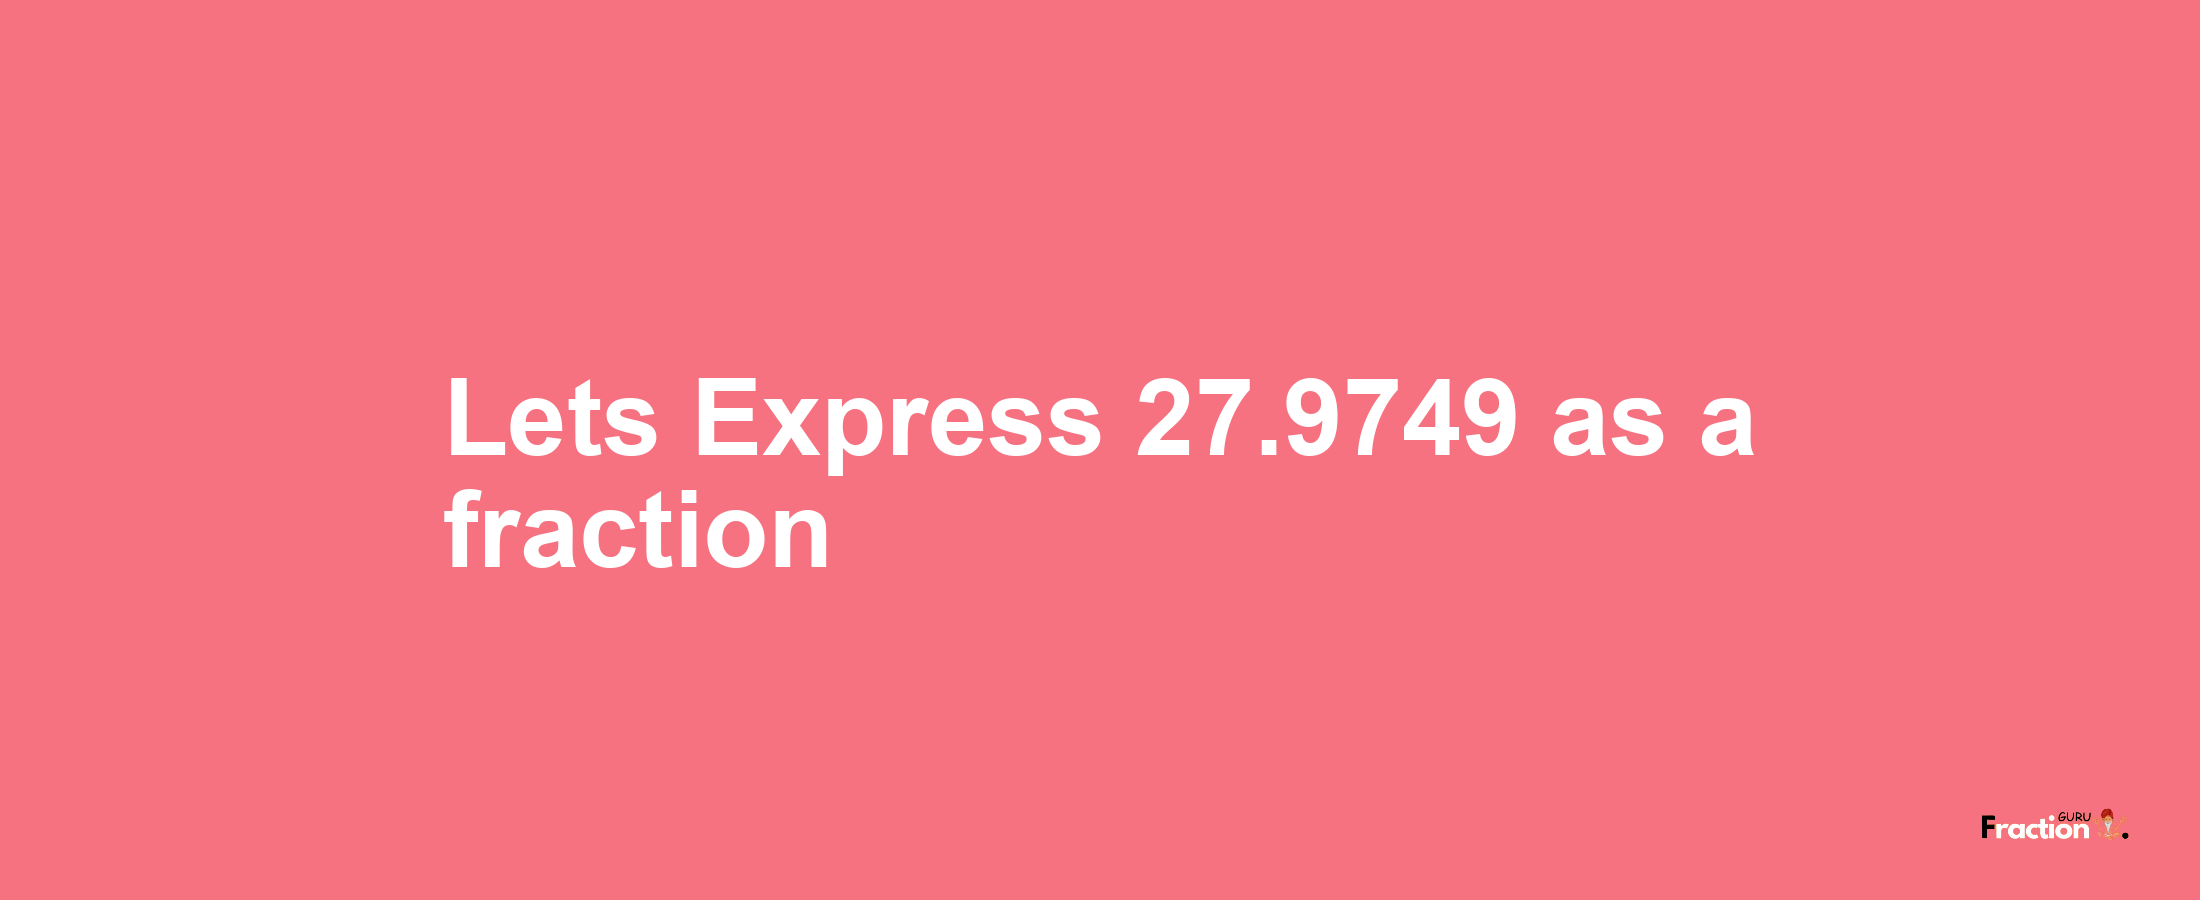 Lets Express 27.9749 as afraction